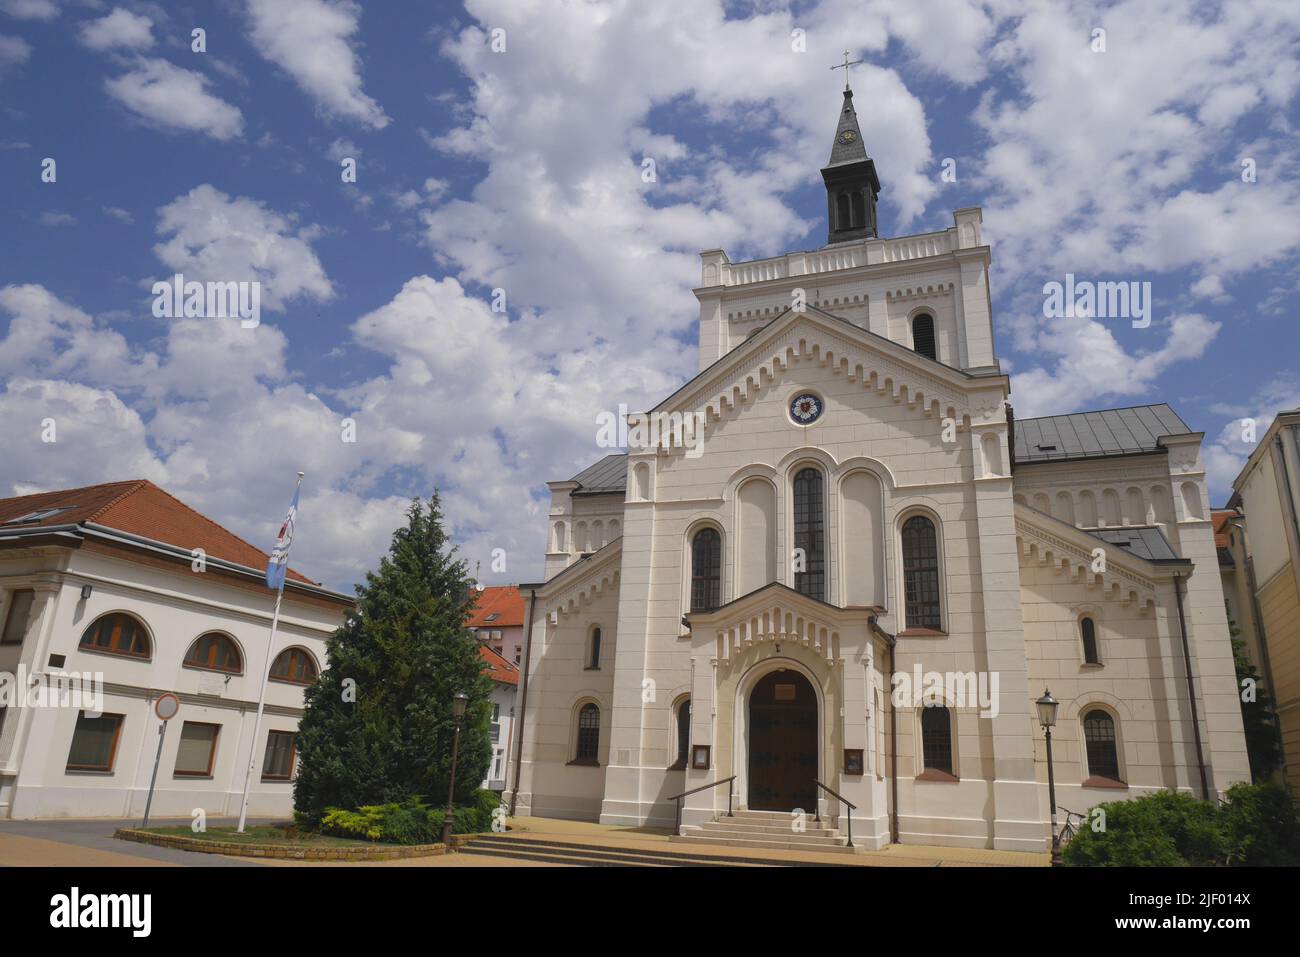 The 19th century Lutheran Evangelical Church, Kecskemet, Hungary, designed by Miklos Ybl Stock Photo